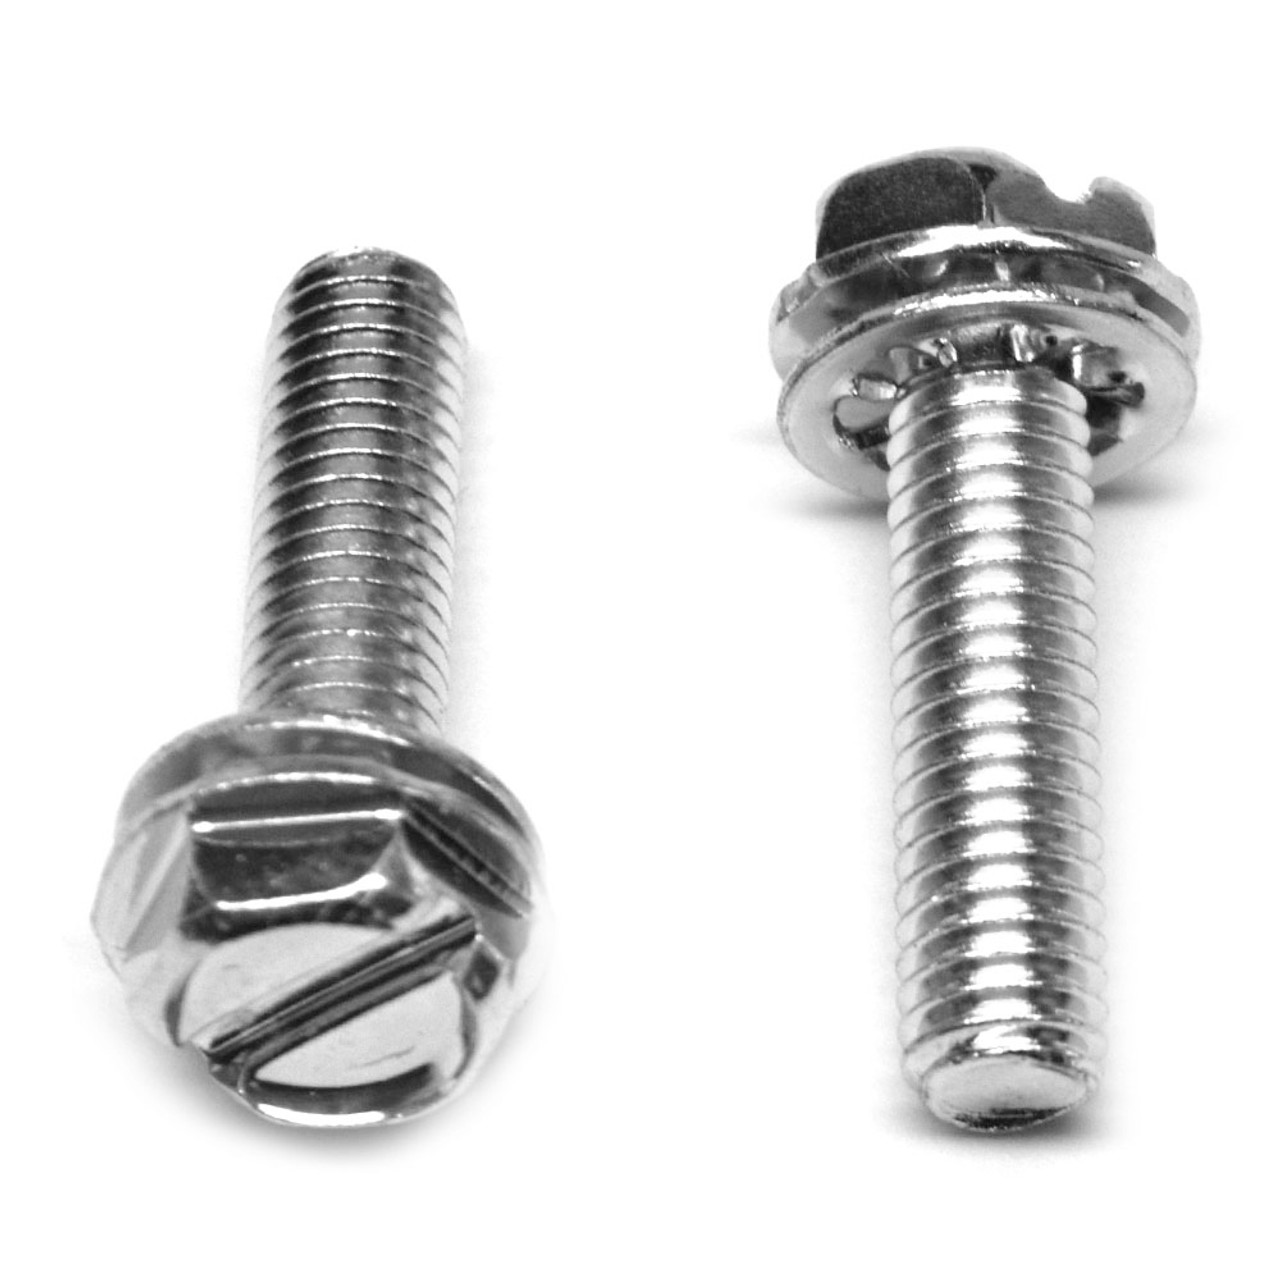 #8-32 x 1/2" (FT) Coarse Thread Machine Screw SEMS Slotted Hex Washer Head Internal Tooth Lockwasher Low Carbon Steel Zinc Plated